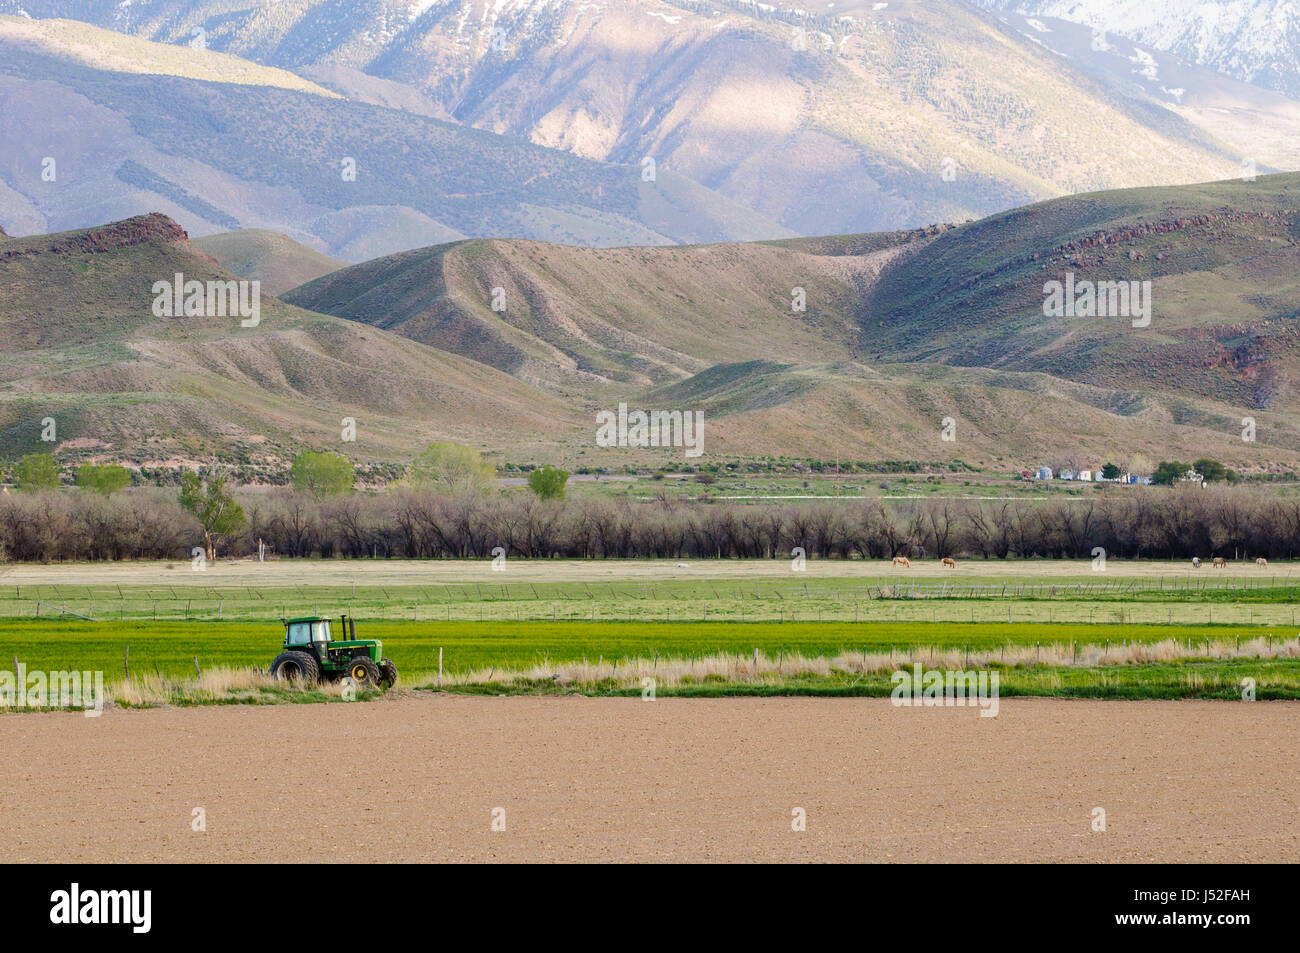 Tractor parked in a farmer's field in Joseph, Utah, USA. Stock Photo